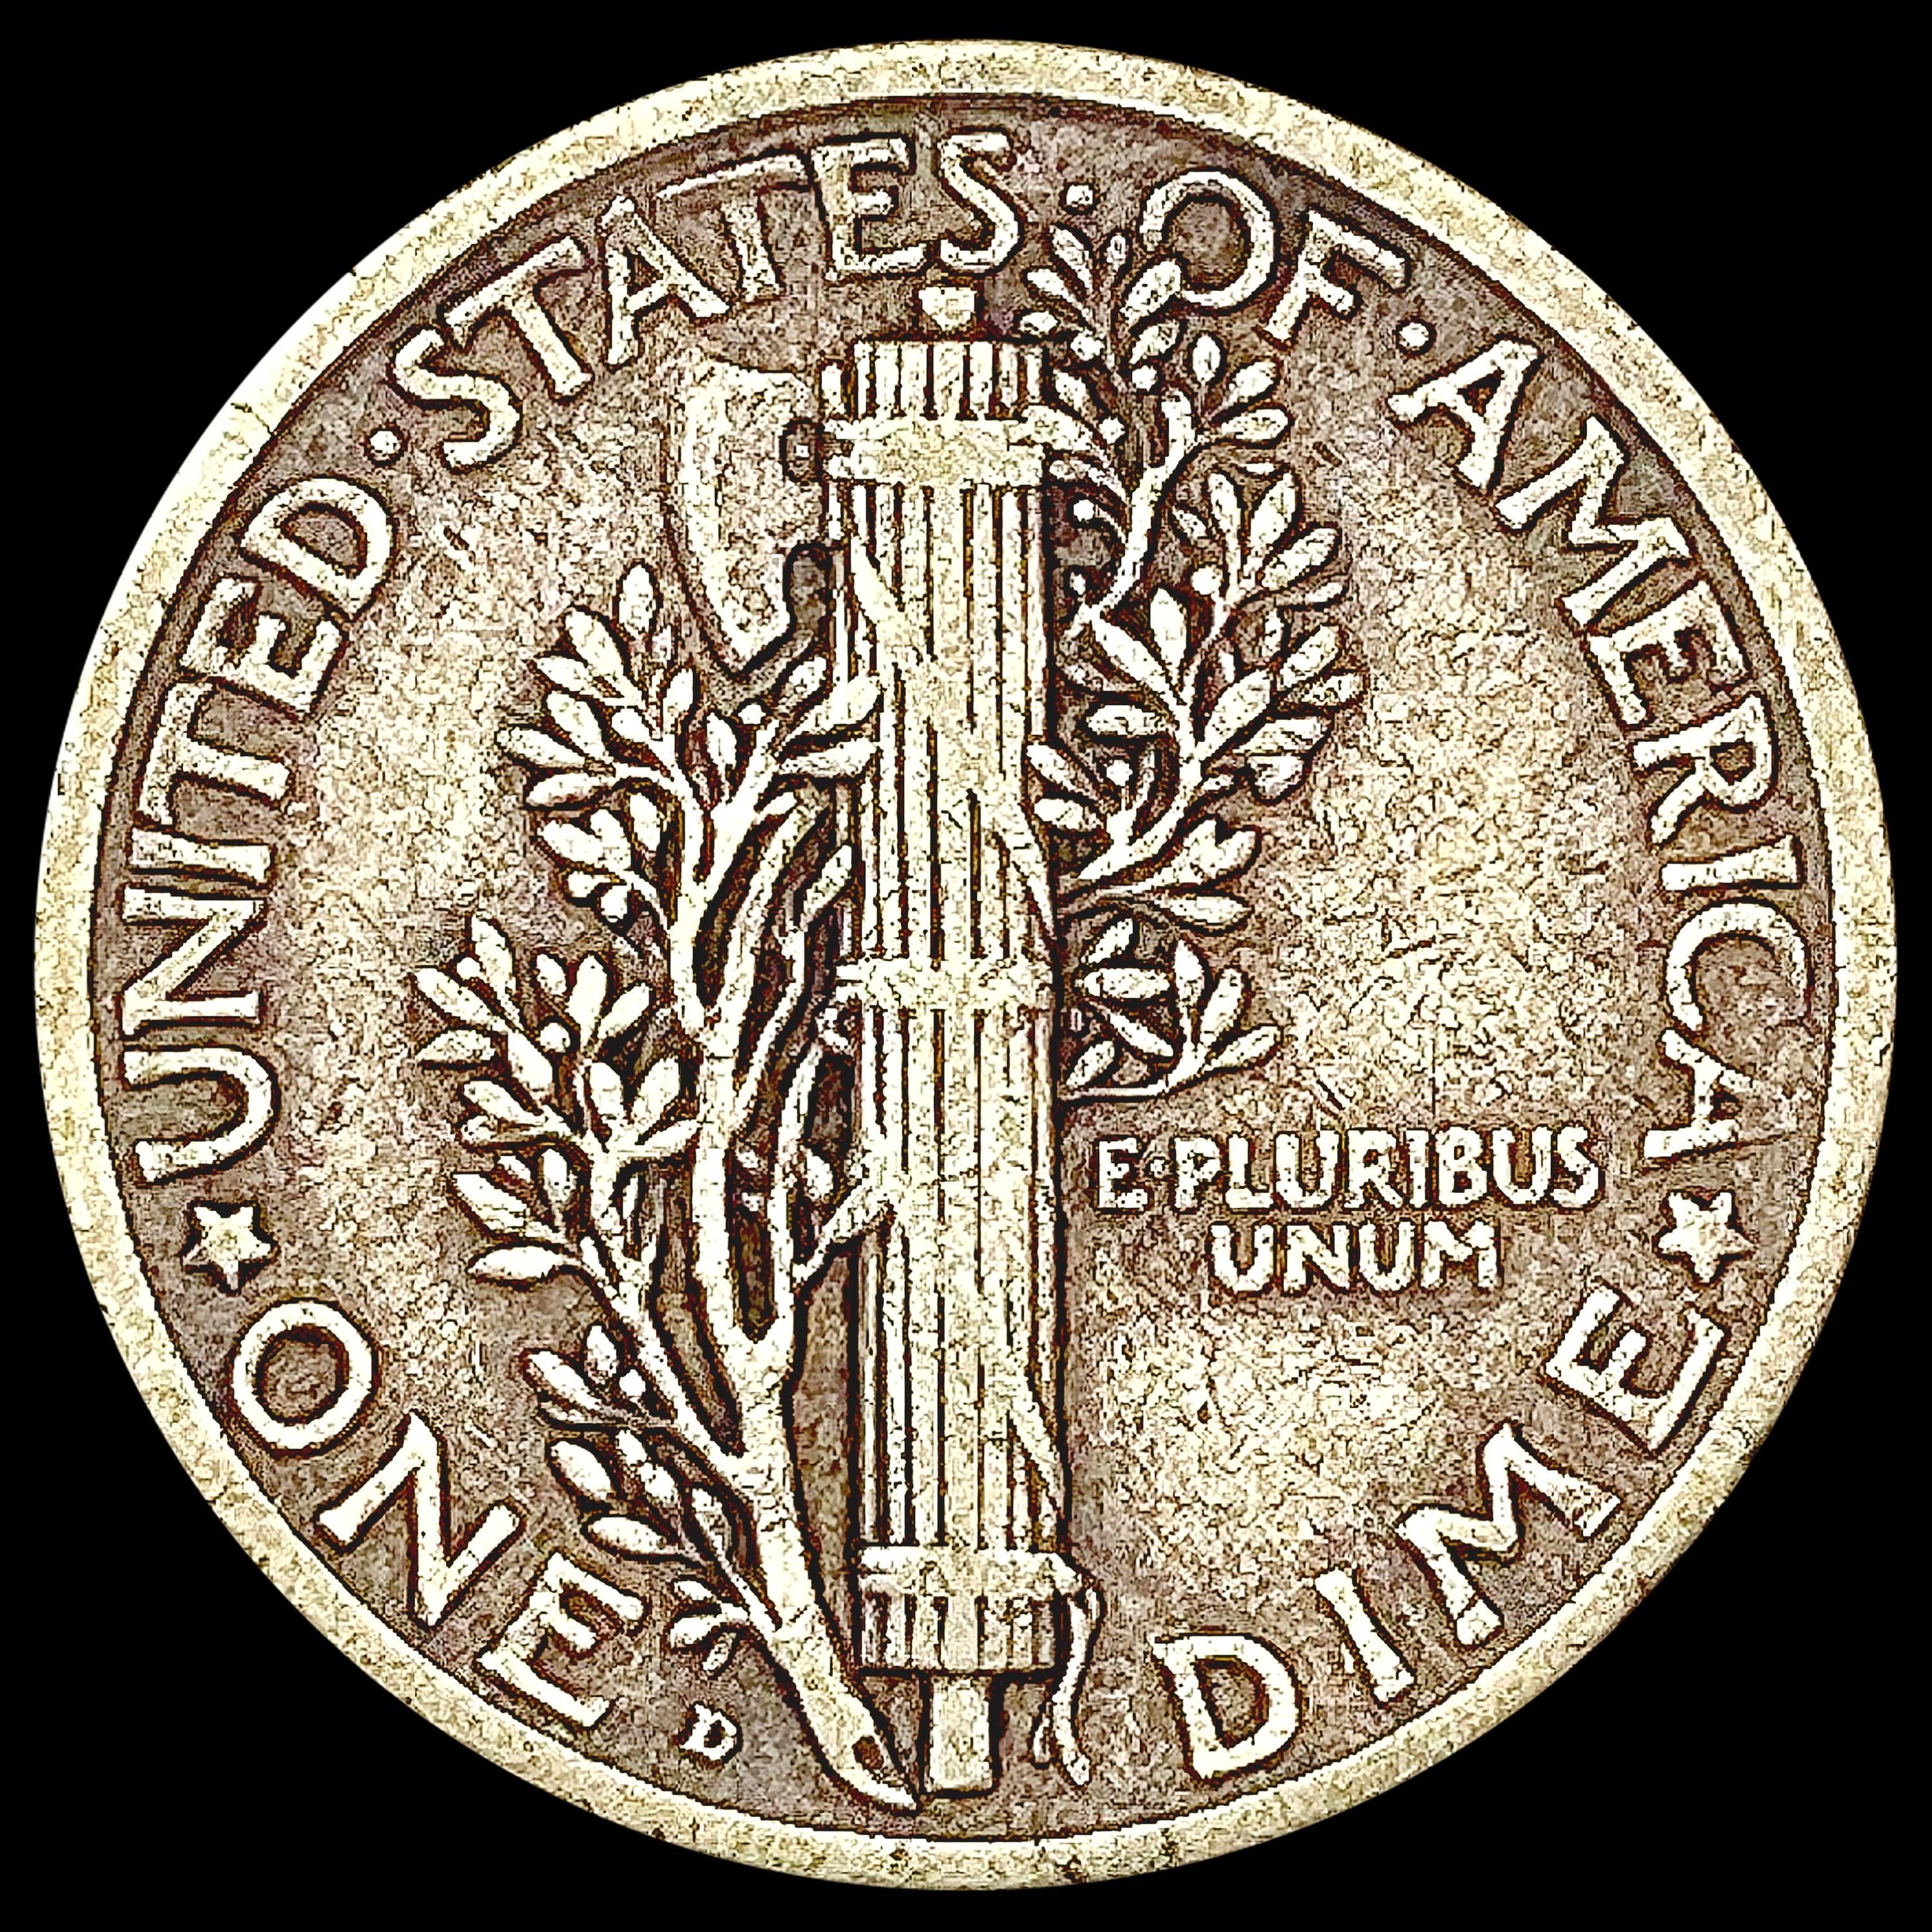 1921-D Mercury Dime NICELY CIRCULATED